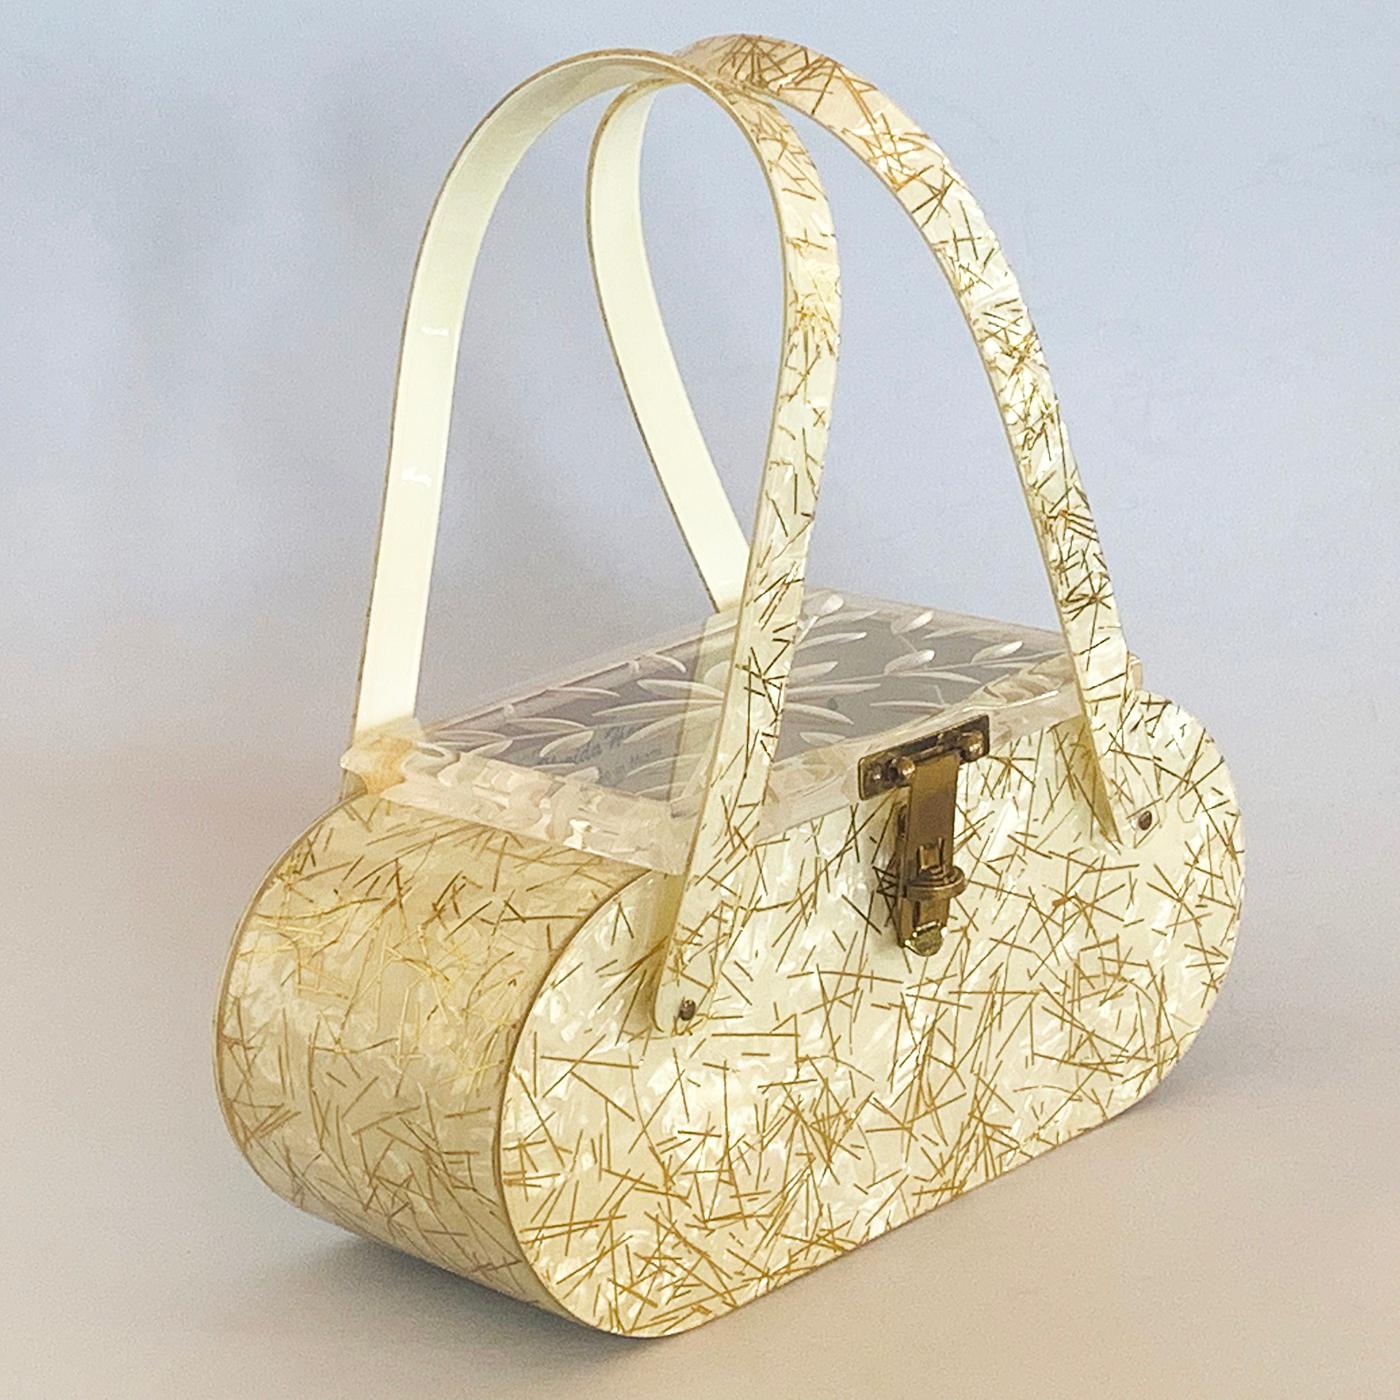 Art Deco Lucite Handbag, in Yellow Pearl with Gilt Strips imbedded throughout. Top lid is in Deep Carved, Clear Lucite in Daisy and Leaves pattern; original brass clasp with turn locking still intact and working perfectly. The interior is clean and